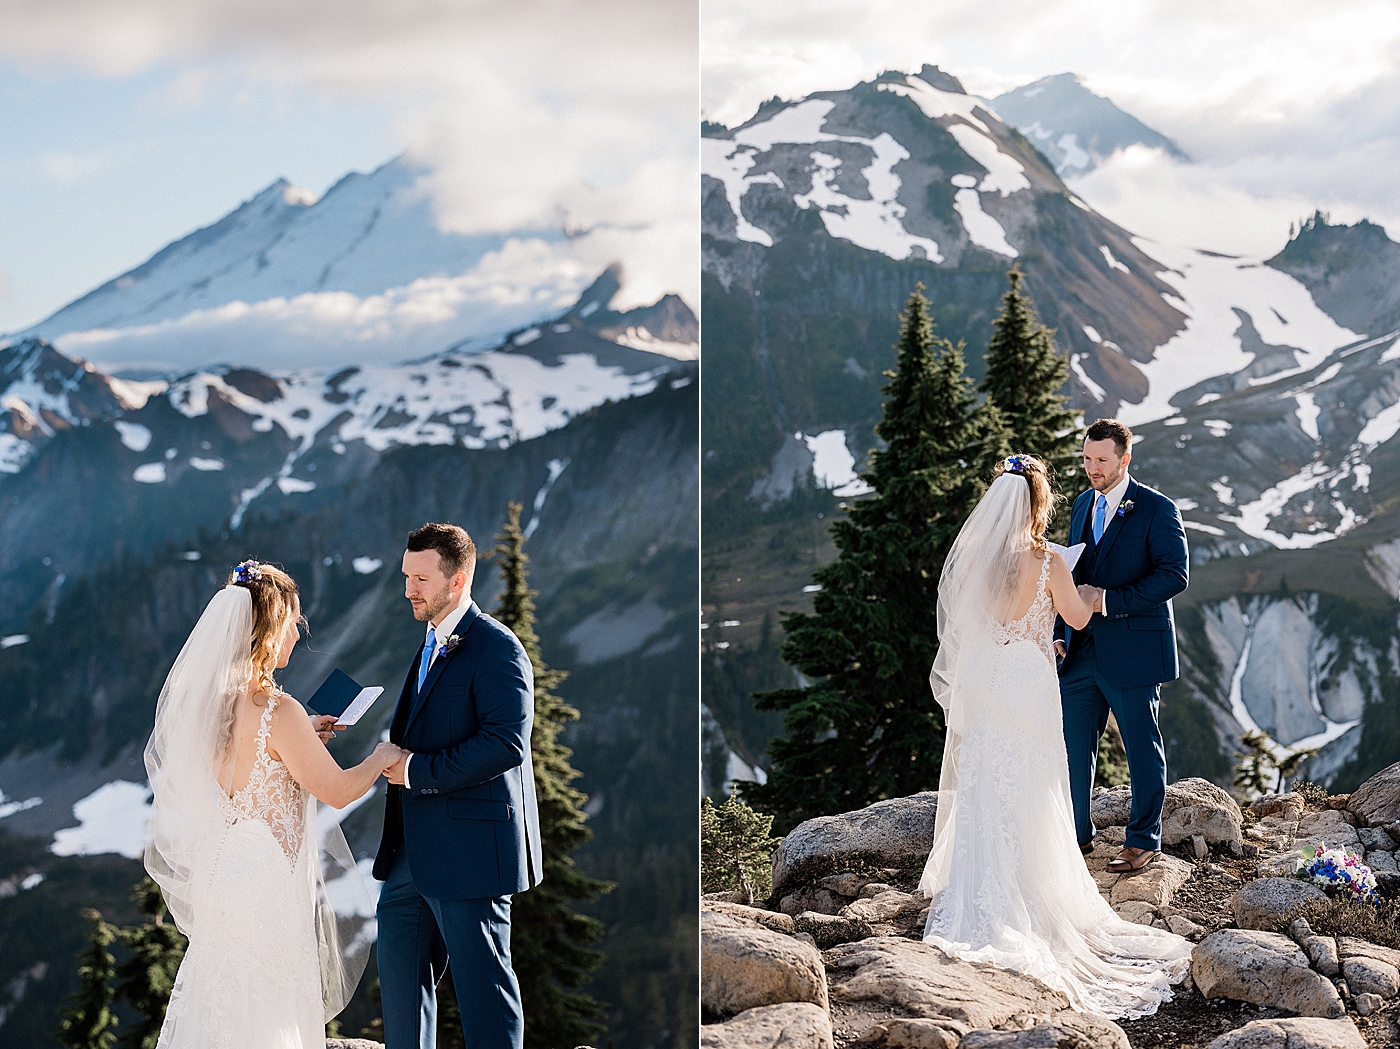 Couple exchanging vows at Artist Point. Photo by Megan Montalvo Photography.